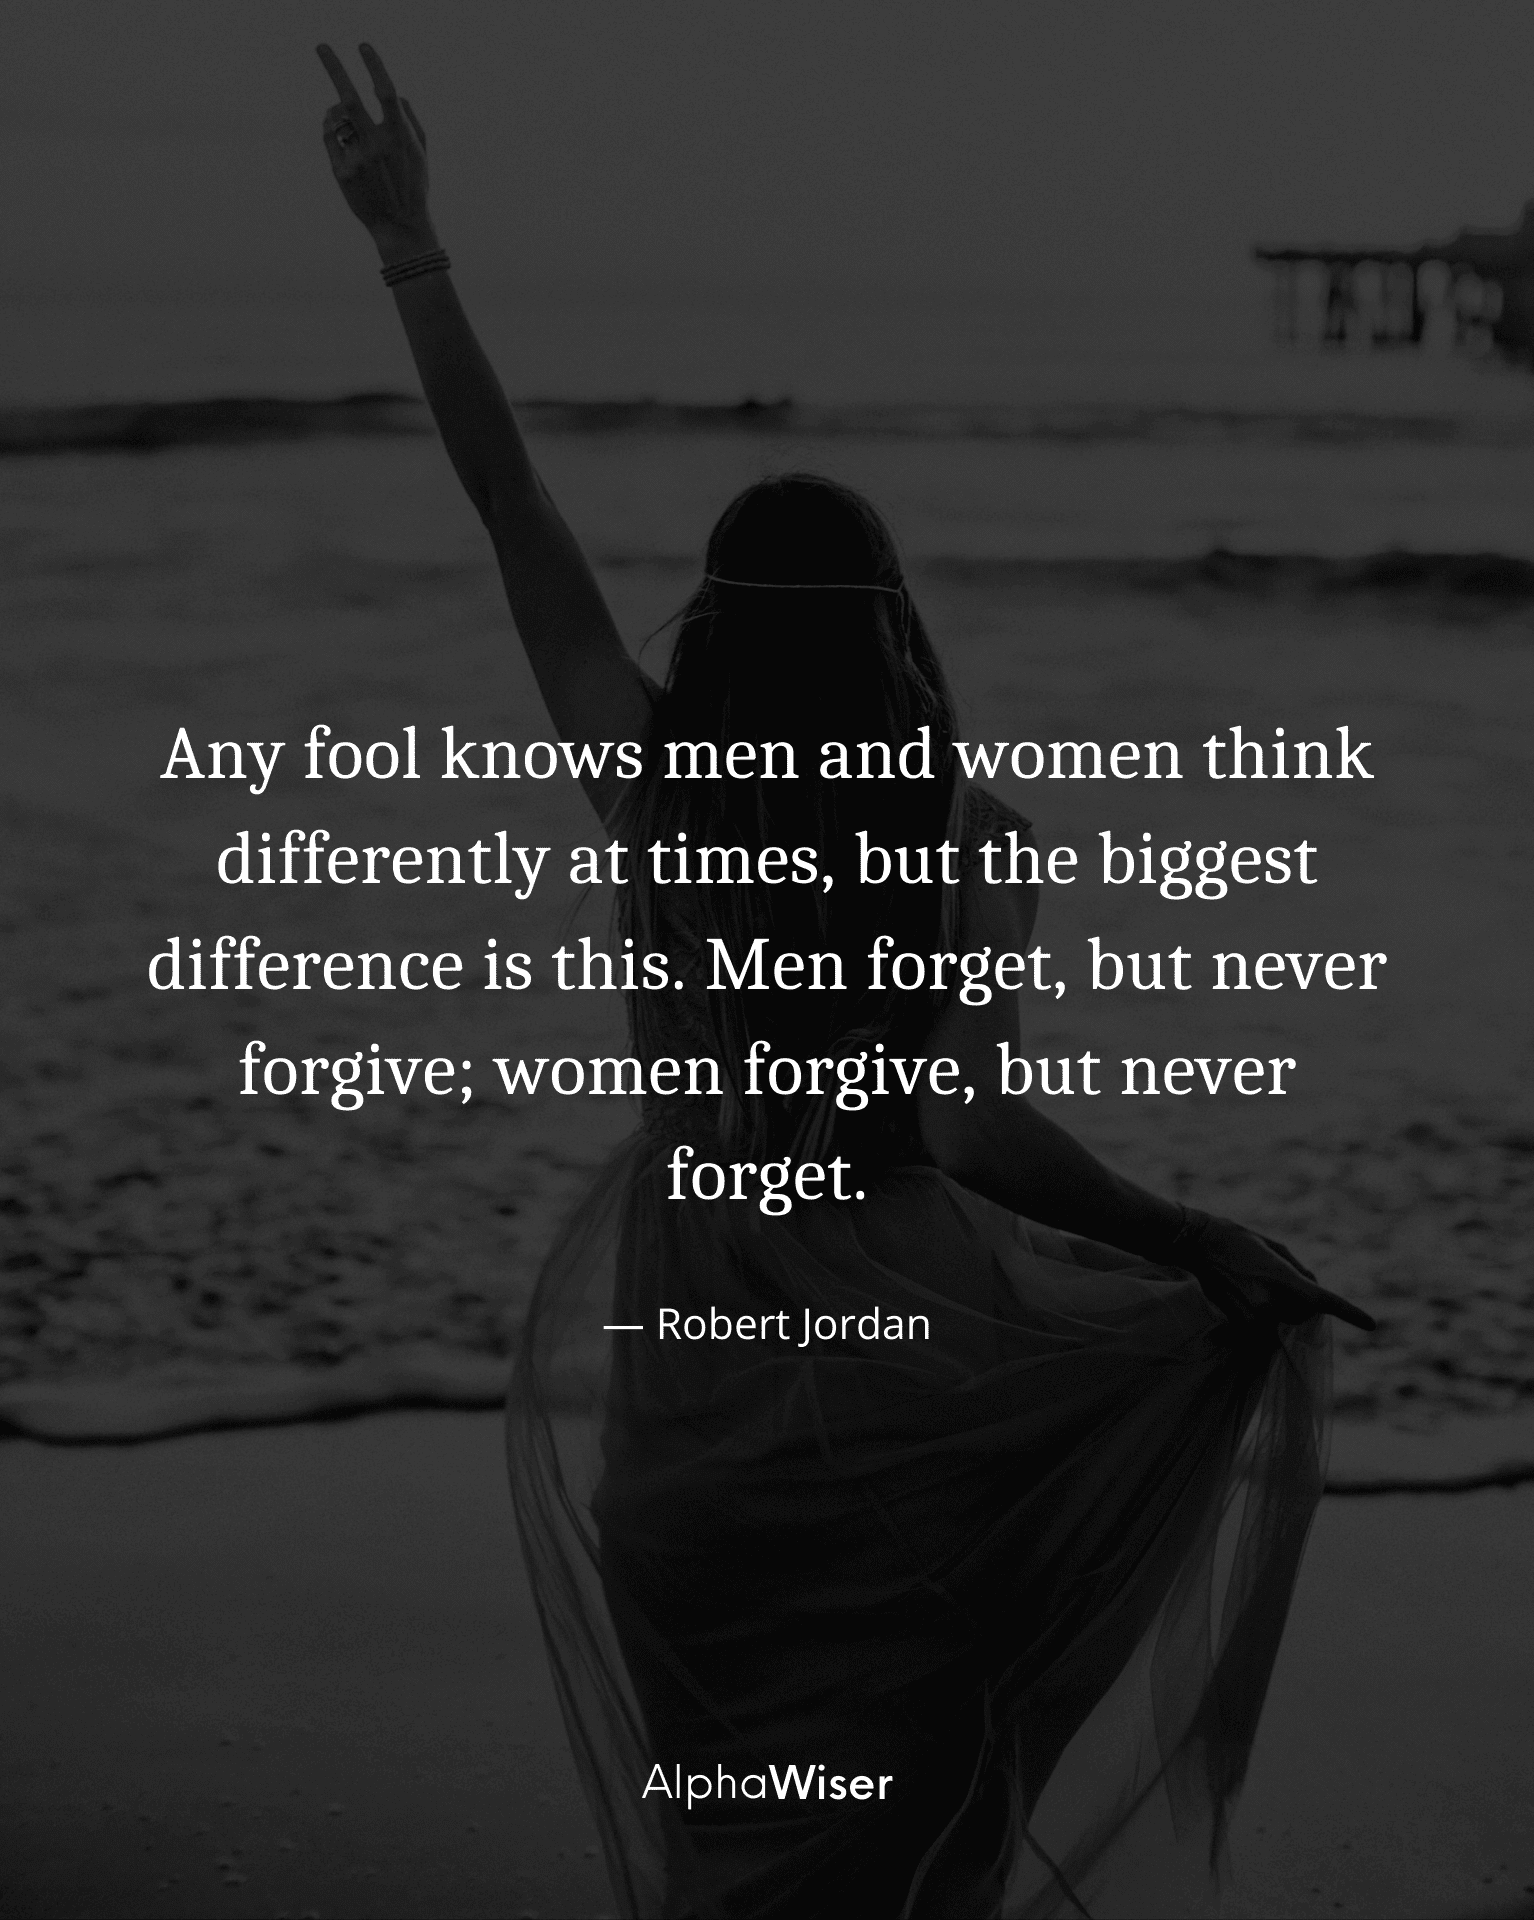 Any fool knows men and women think differently at times, but the biggest difference is this